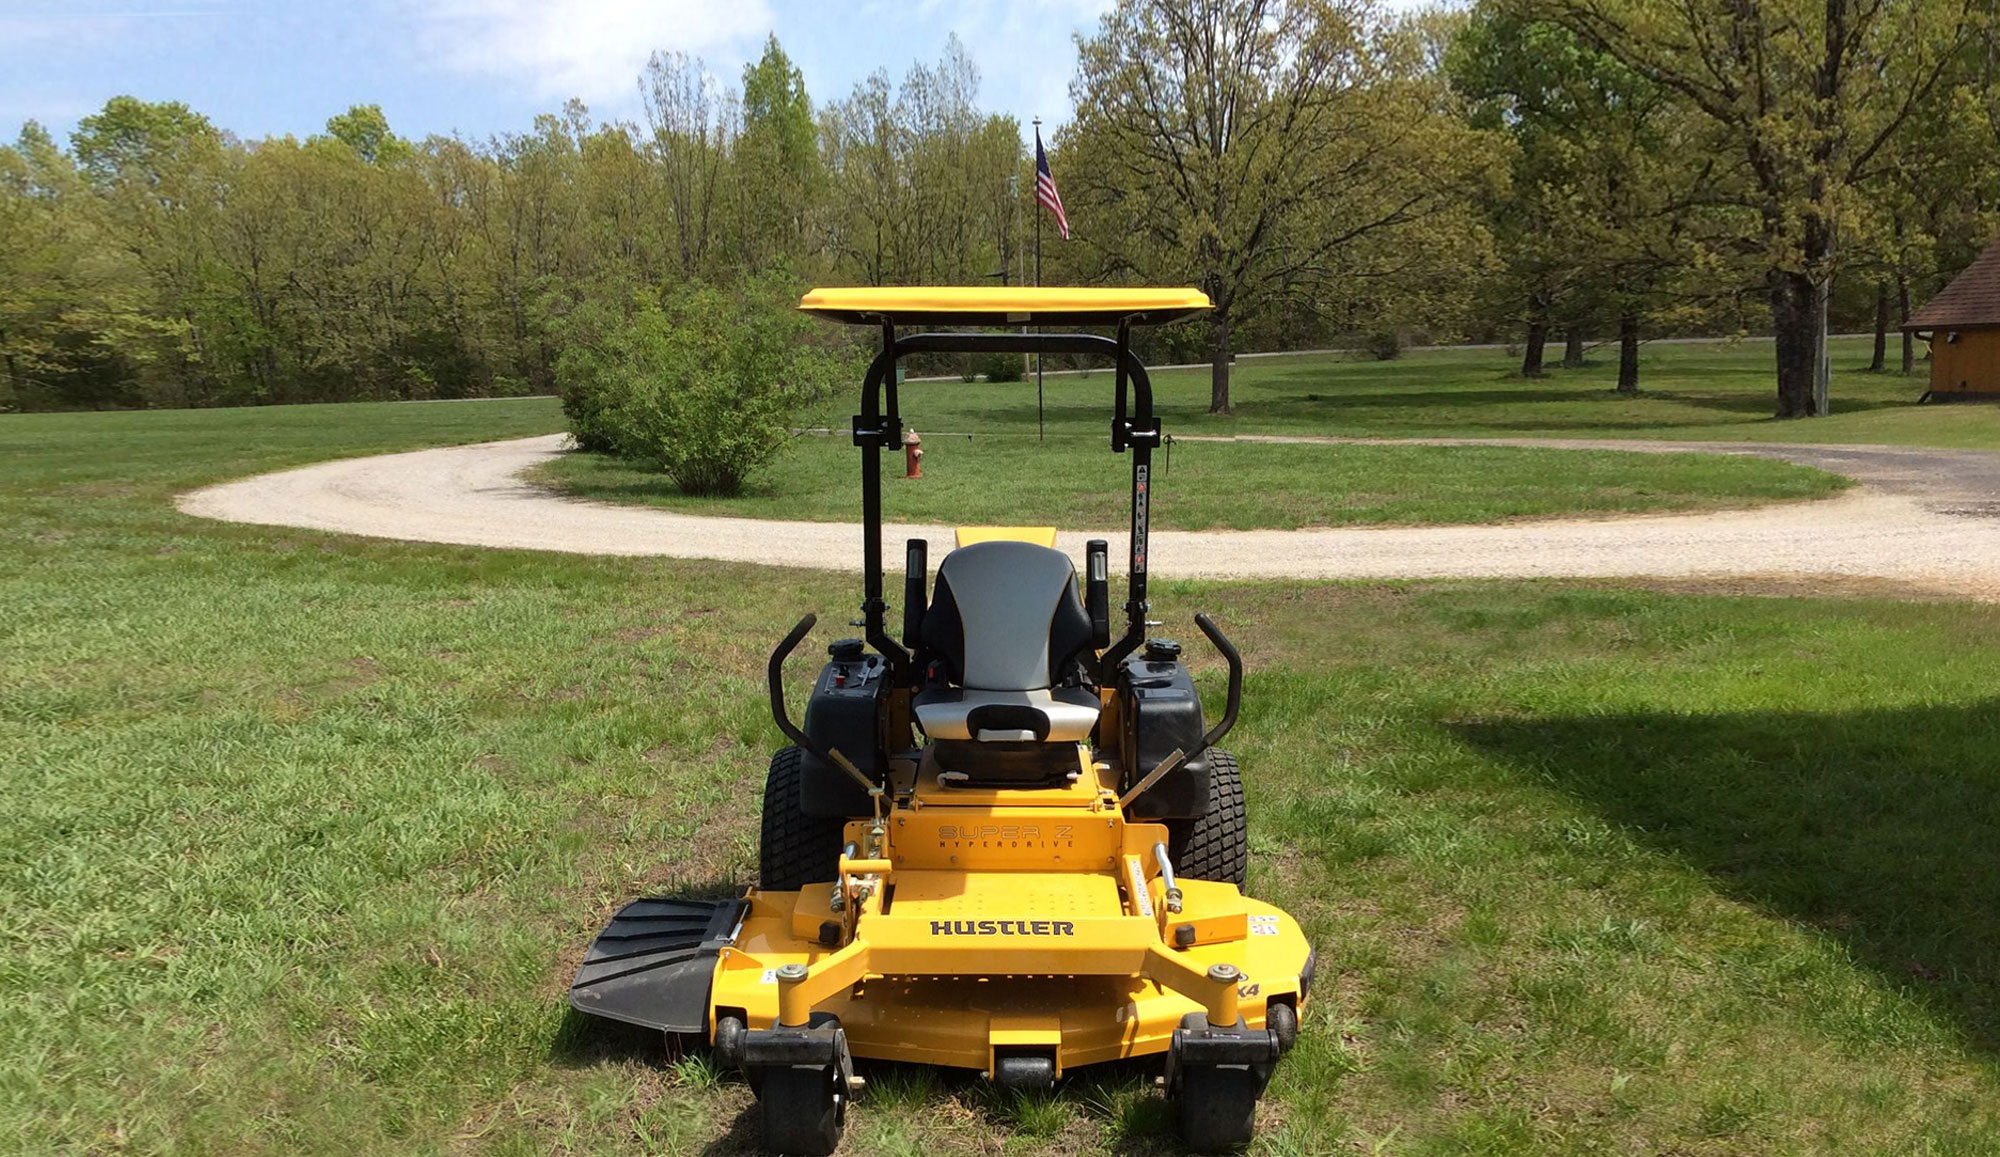 Tractor canopies and mower canopies  by SunGuard USA fit  all sizes of tractors and mowers.